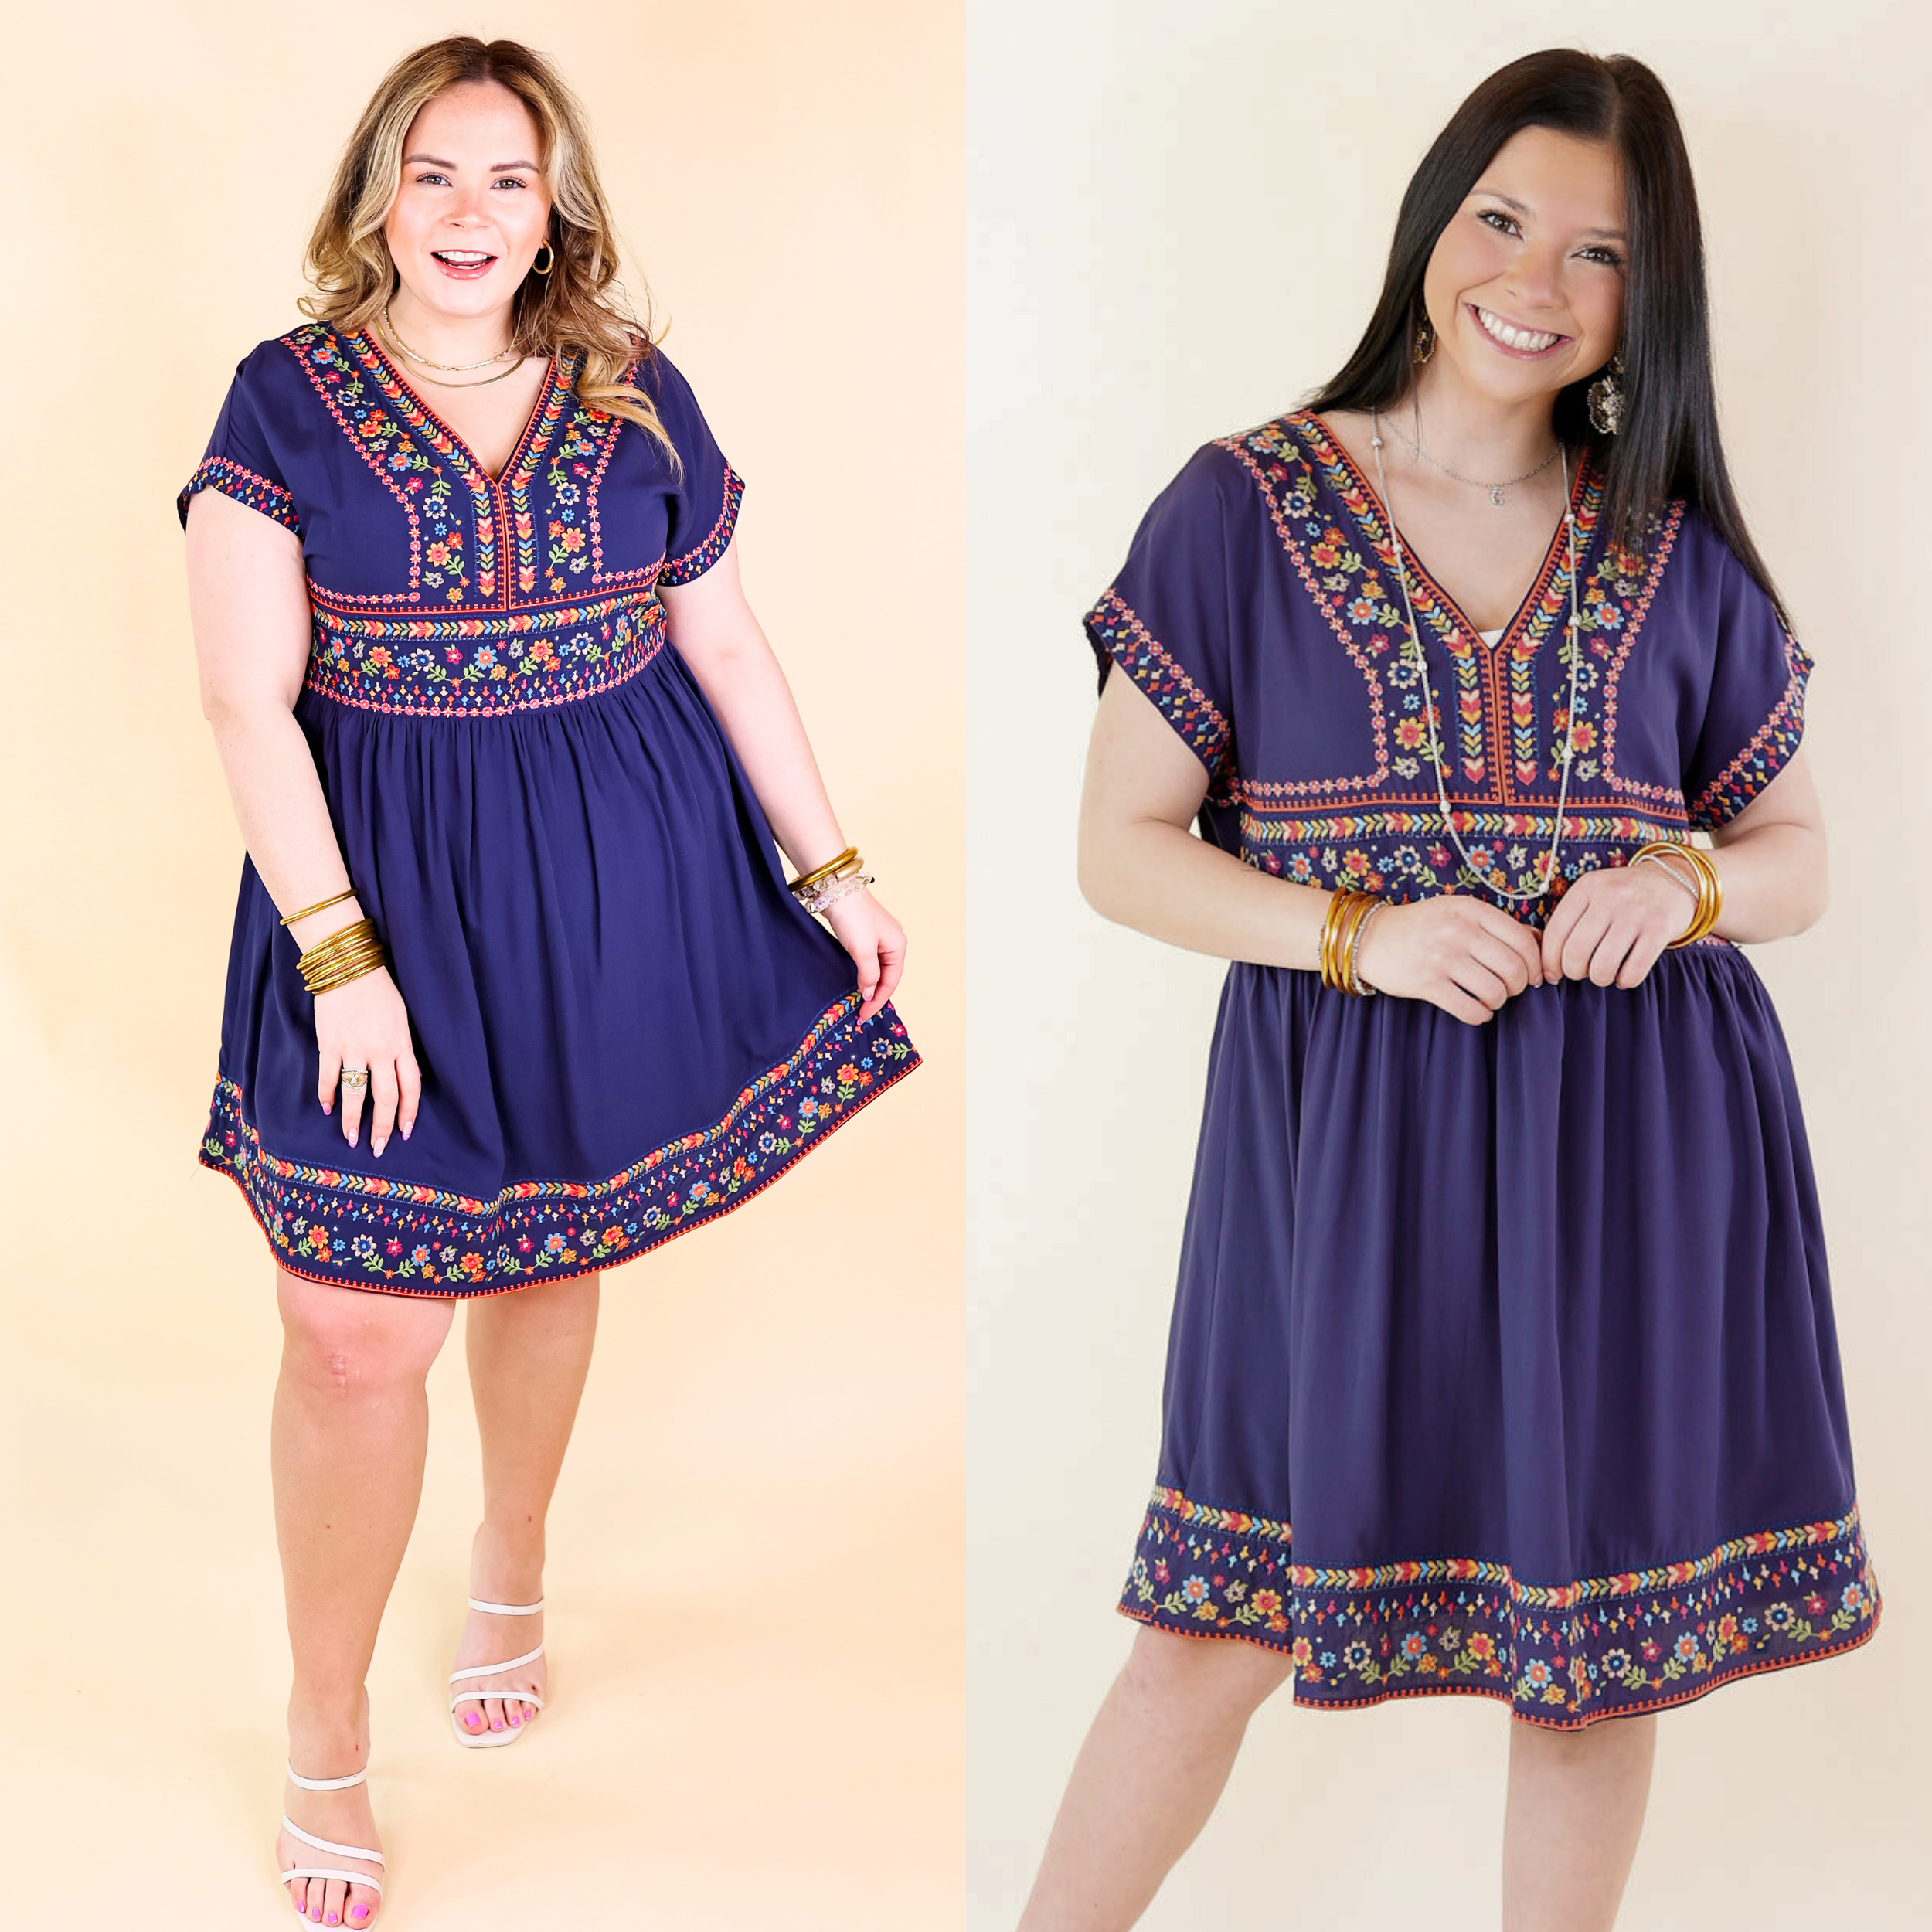 Passing Through V Neck Embroidered Dress with Short Sleeves in Navy Blue